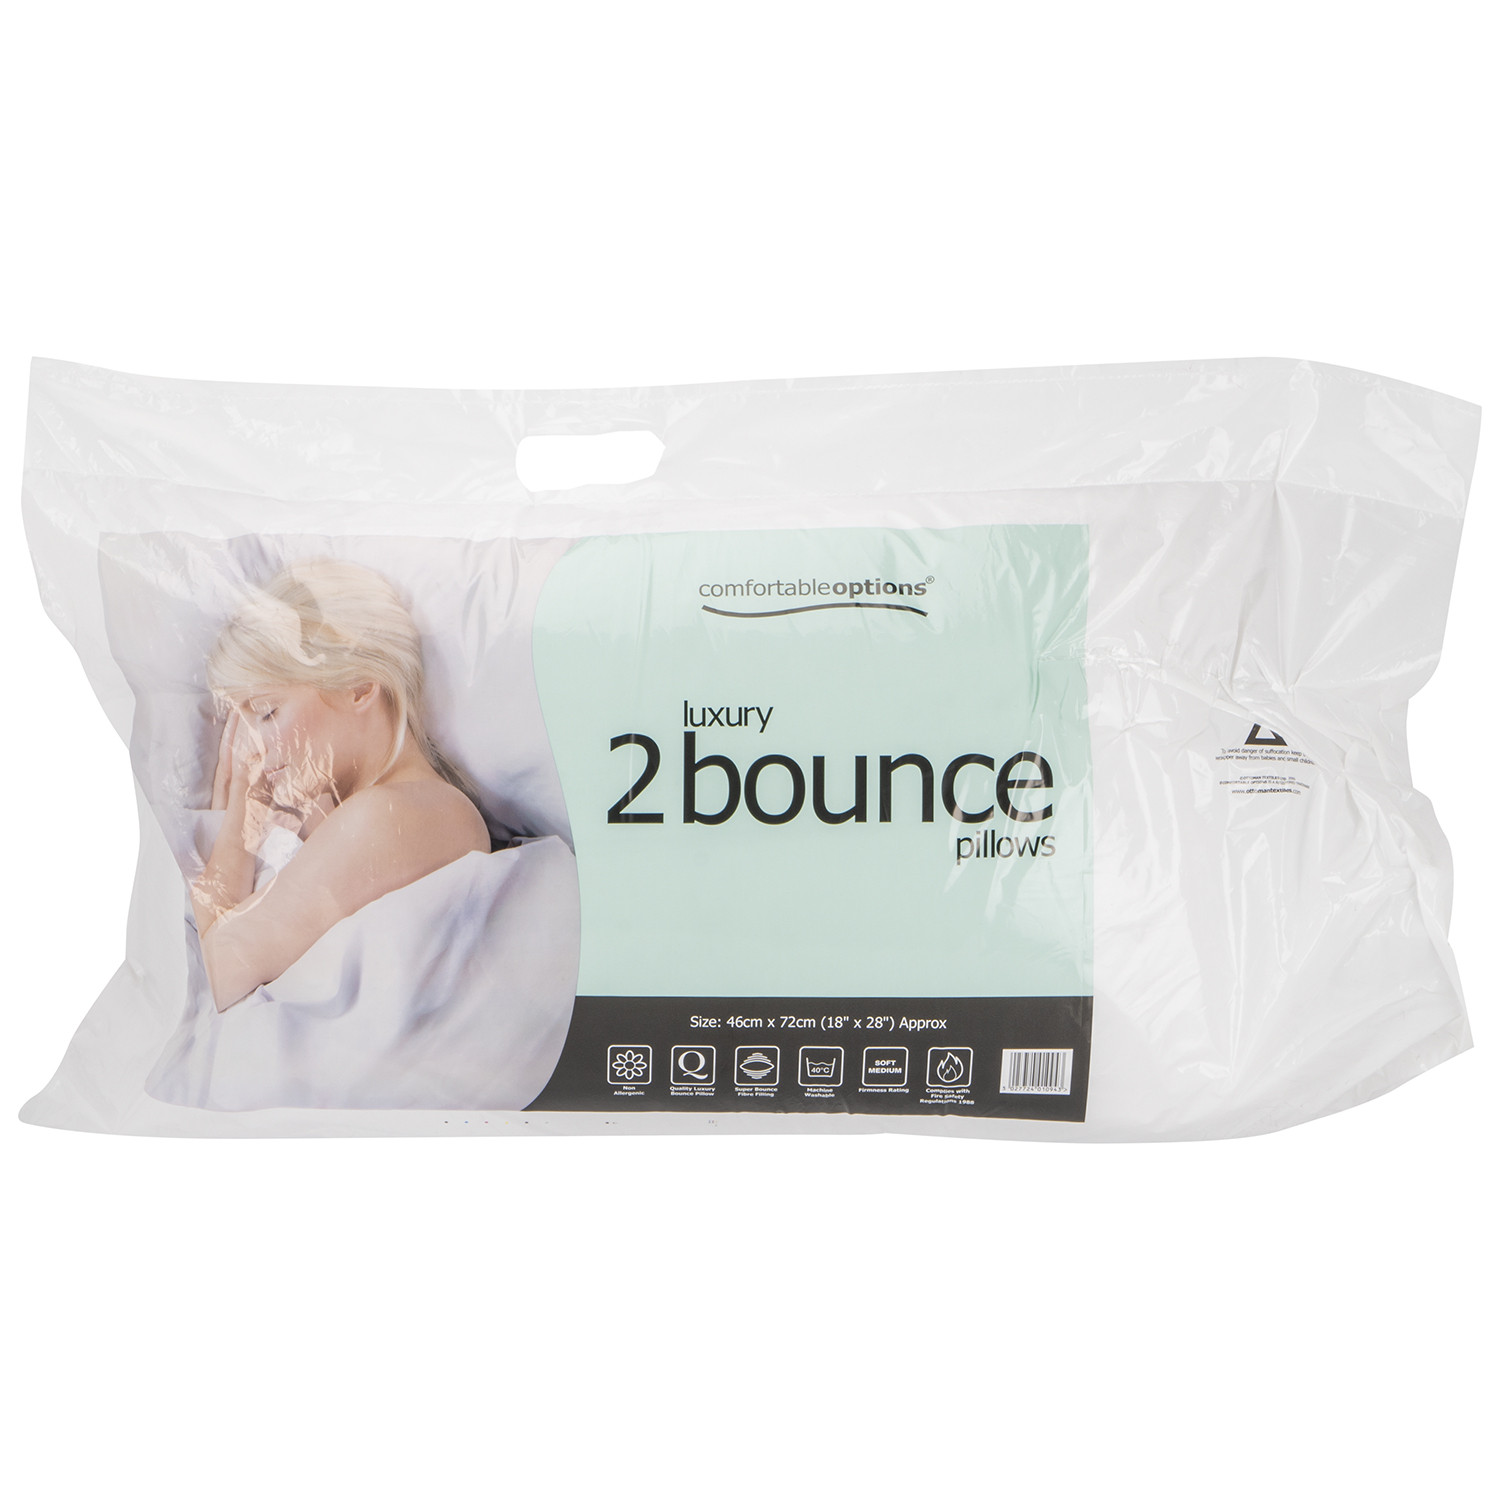 Comfortableoptions Luxury Bounce Pillows 2 Pack Image 1